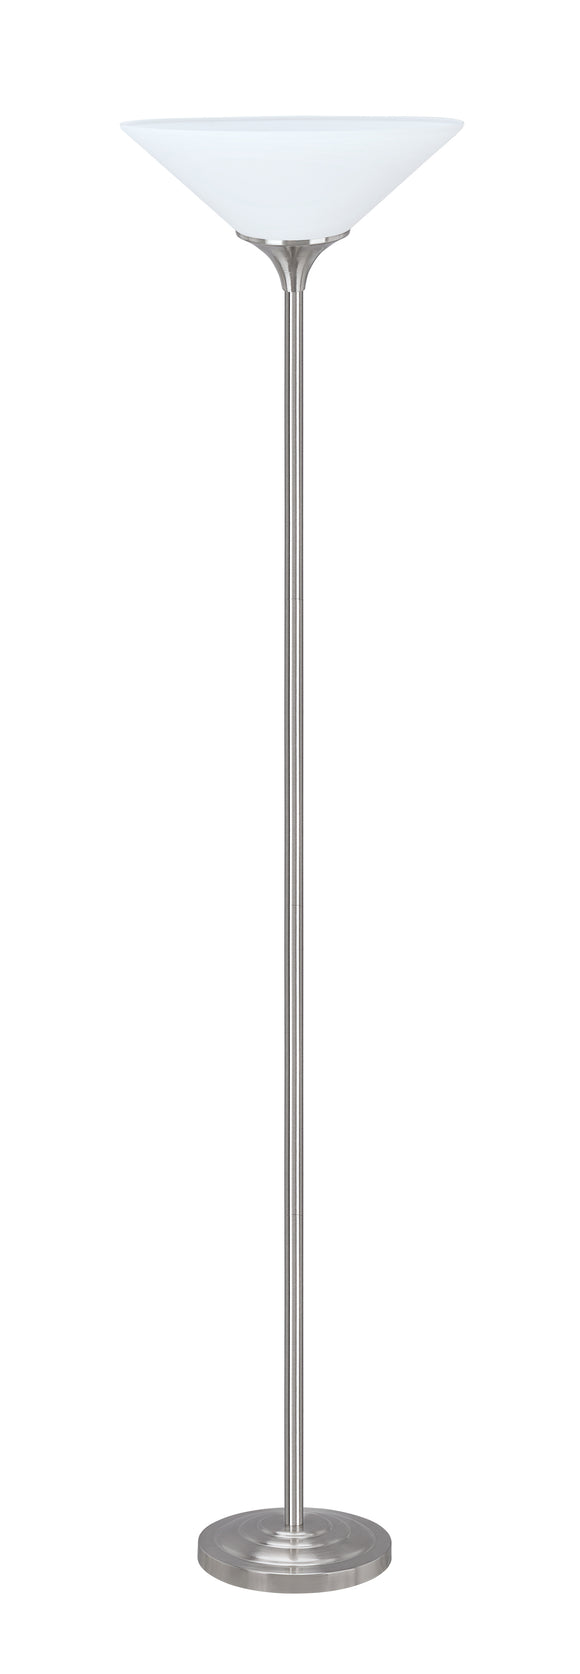 # 45016-11, One-Light Metal Torchiere Floor Lamp, Transitional Design in Satin Nickel Finish, 71